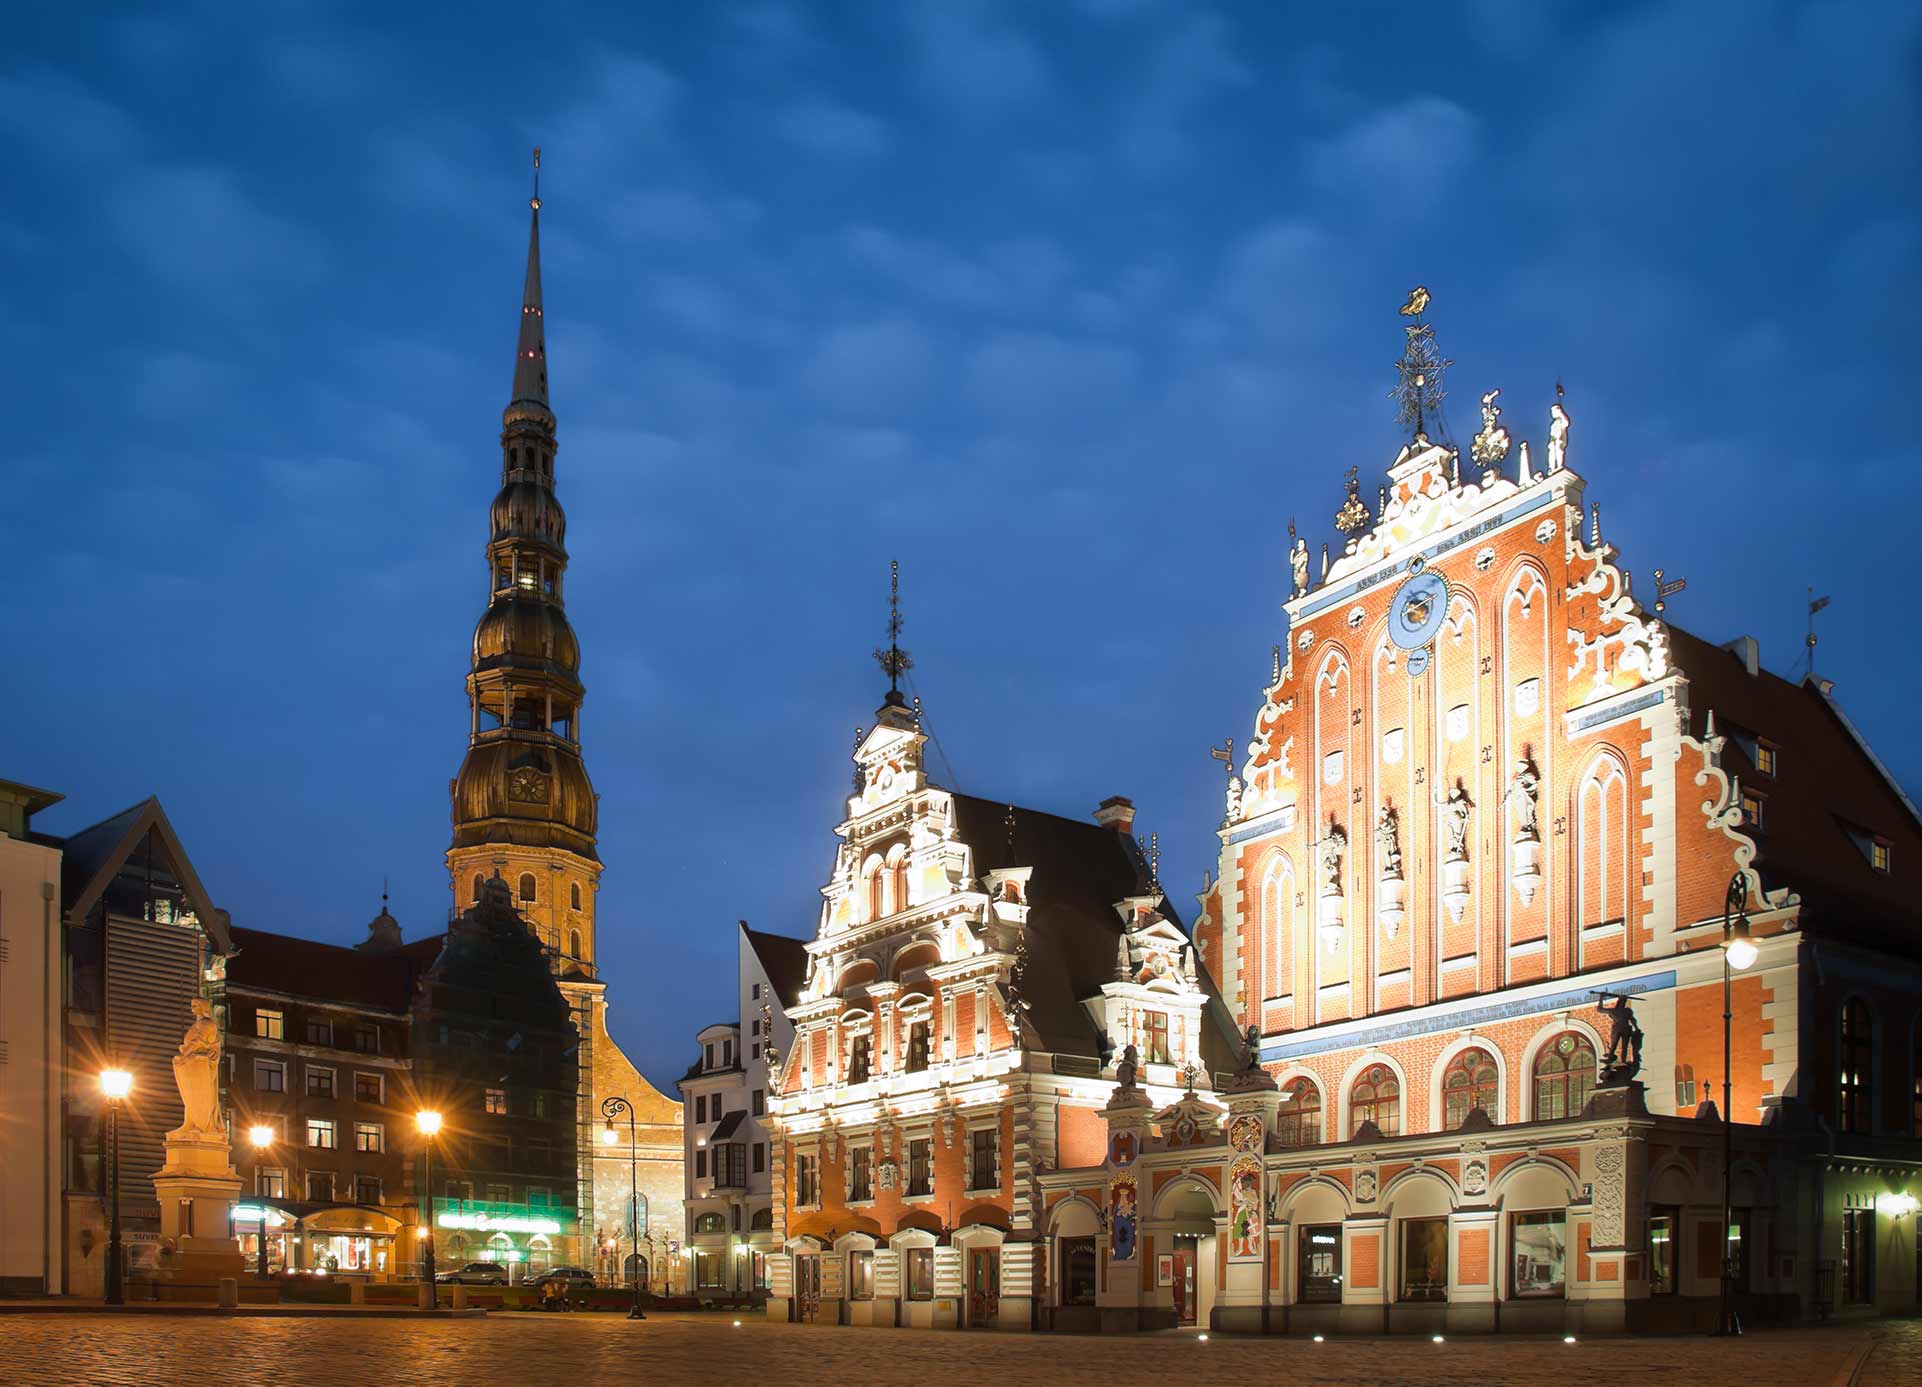 Beautiful old architecture of the central square of Riga, Latvia.